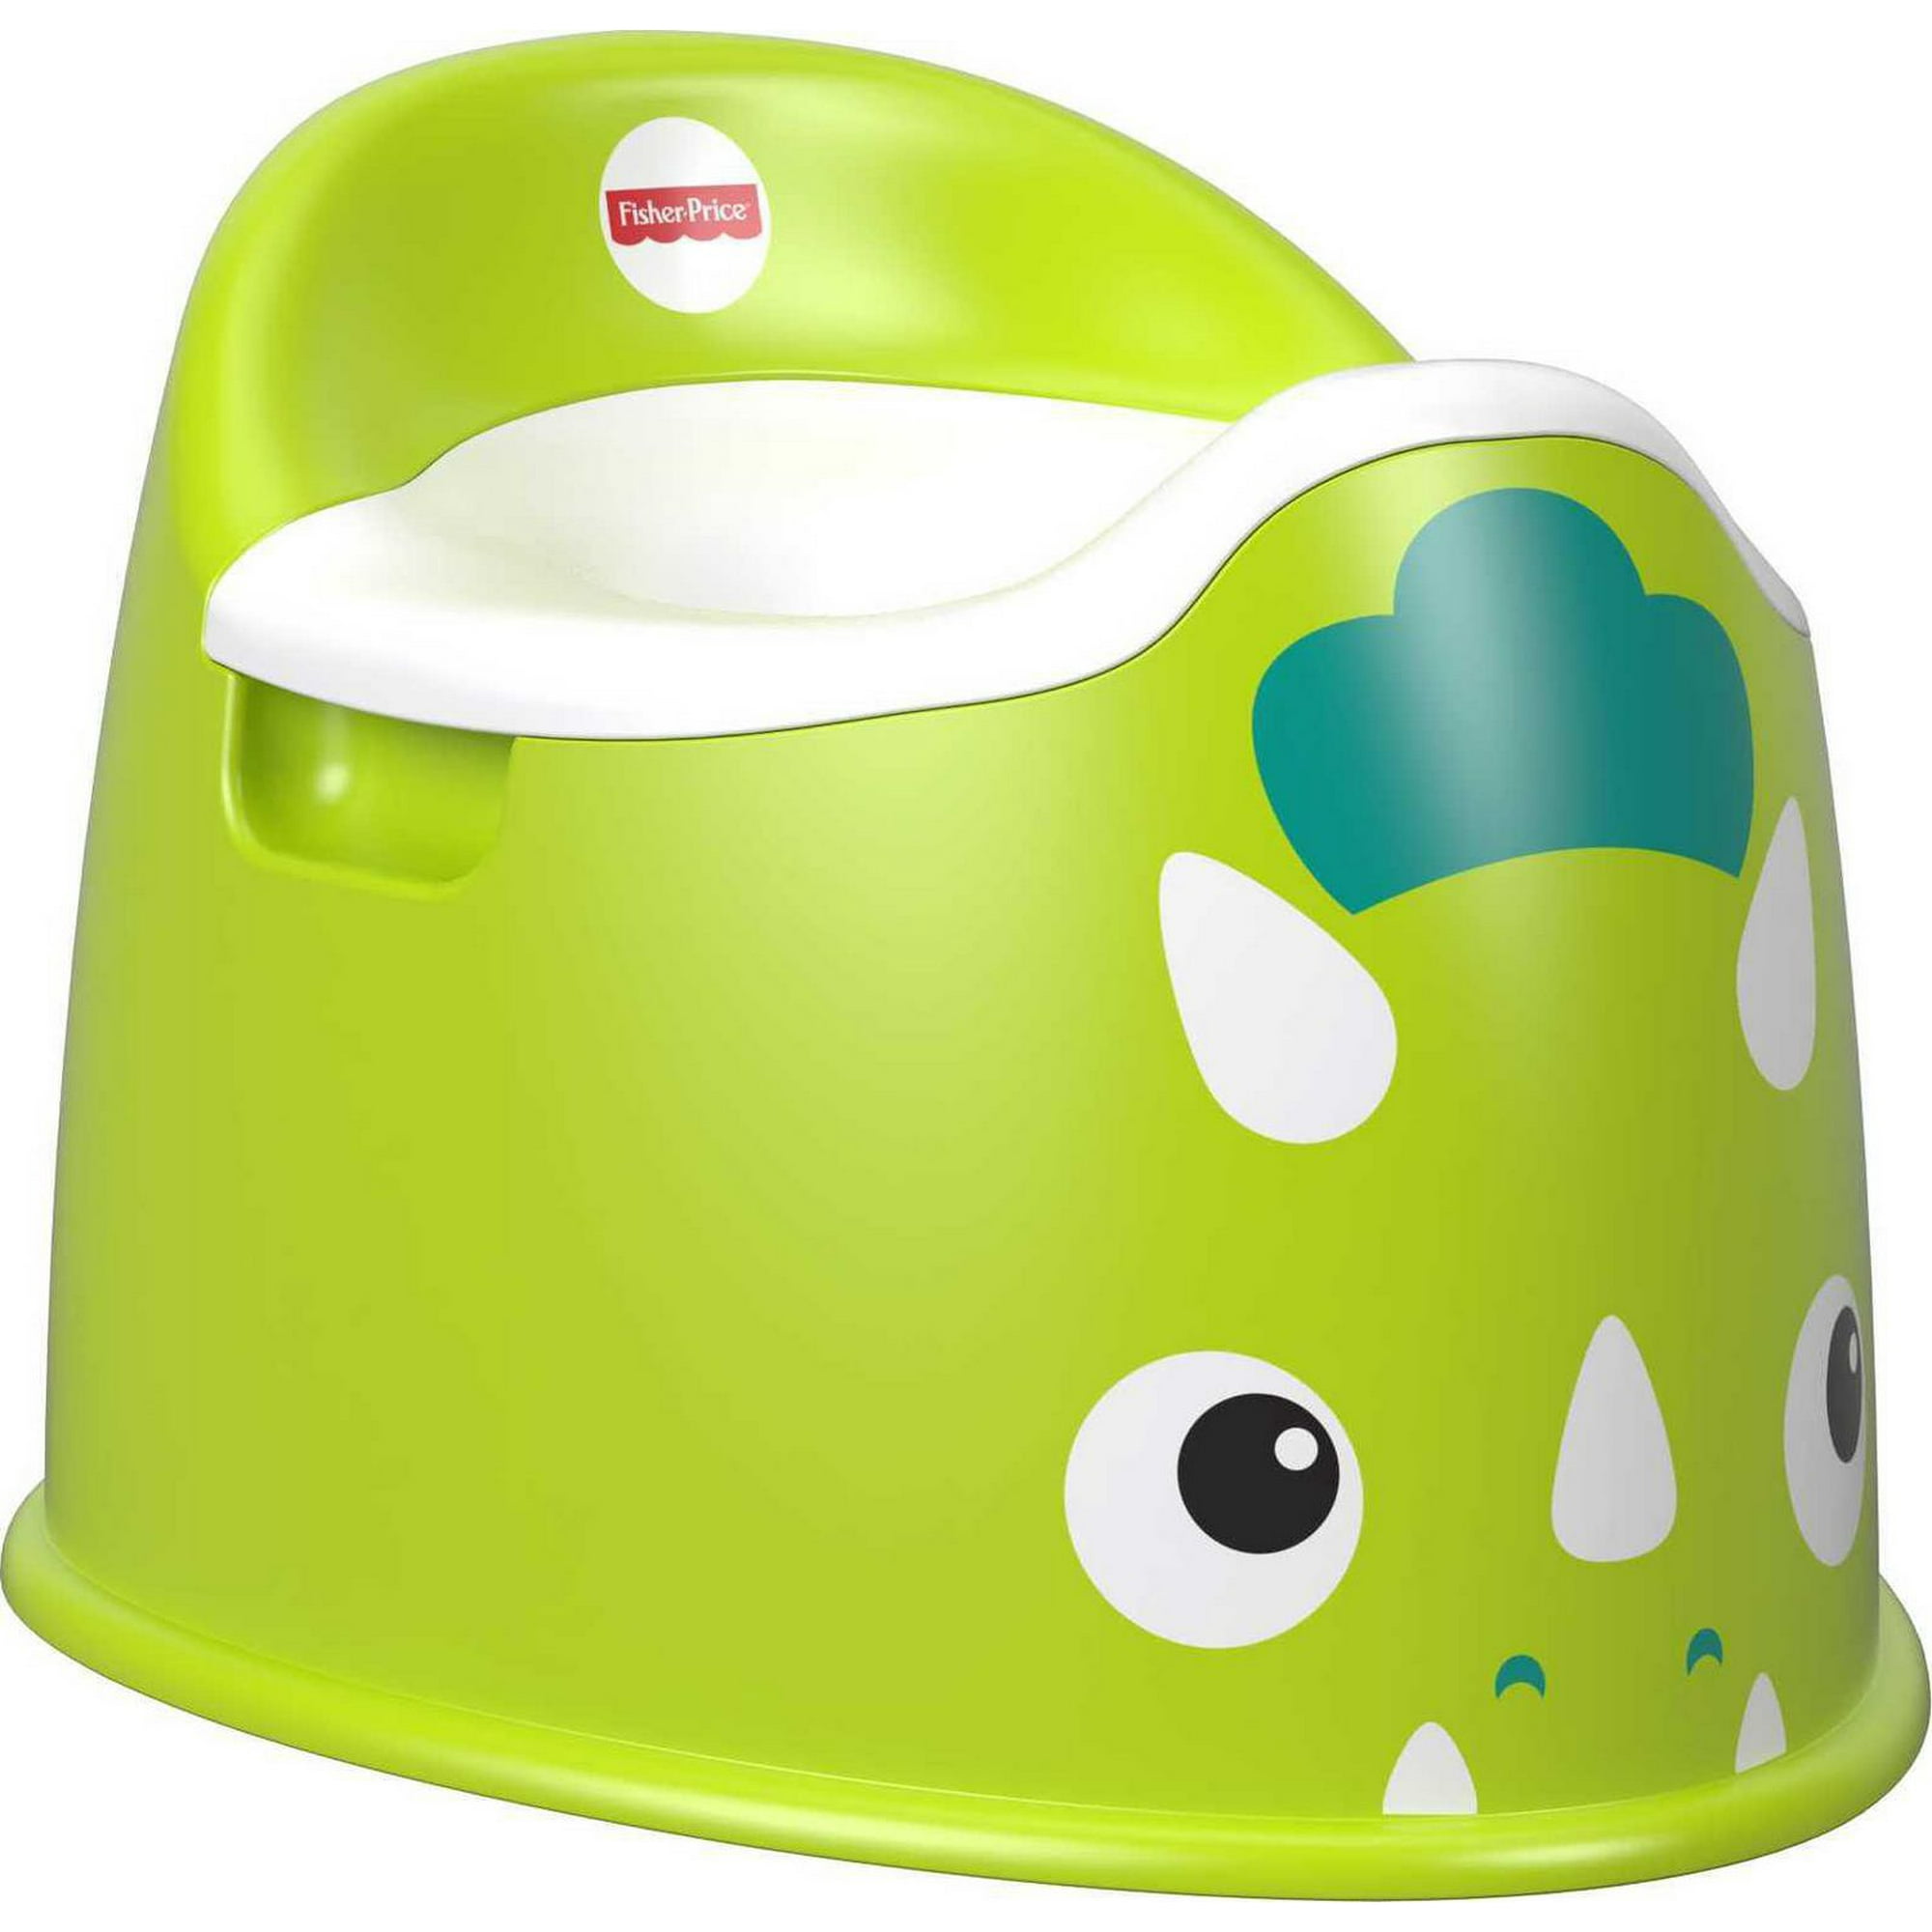 Pull-Ups Potty Training Starter Kit- The First Years Disney India